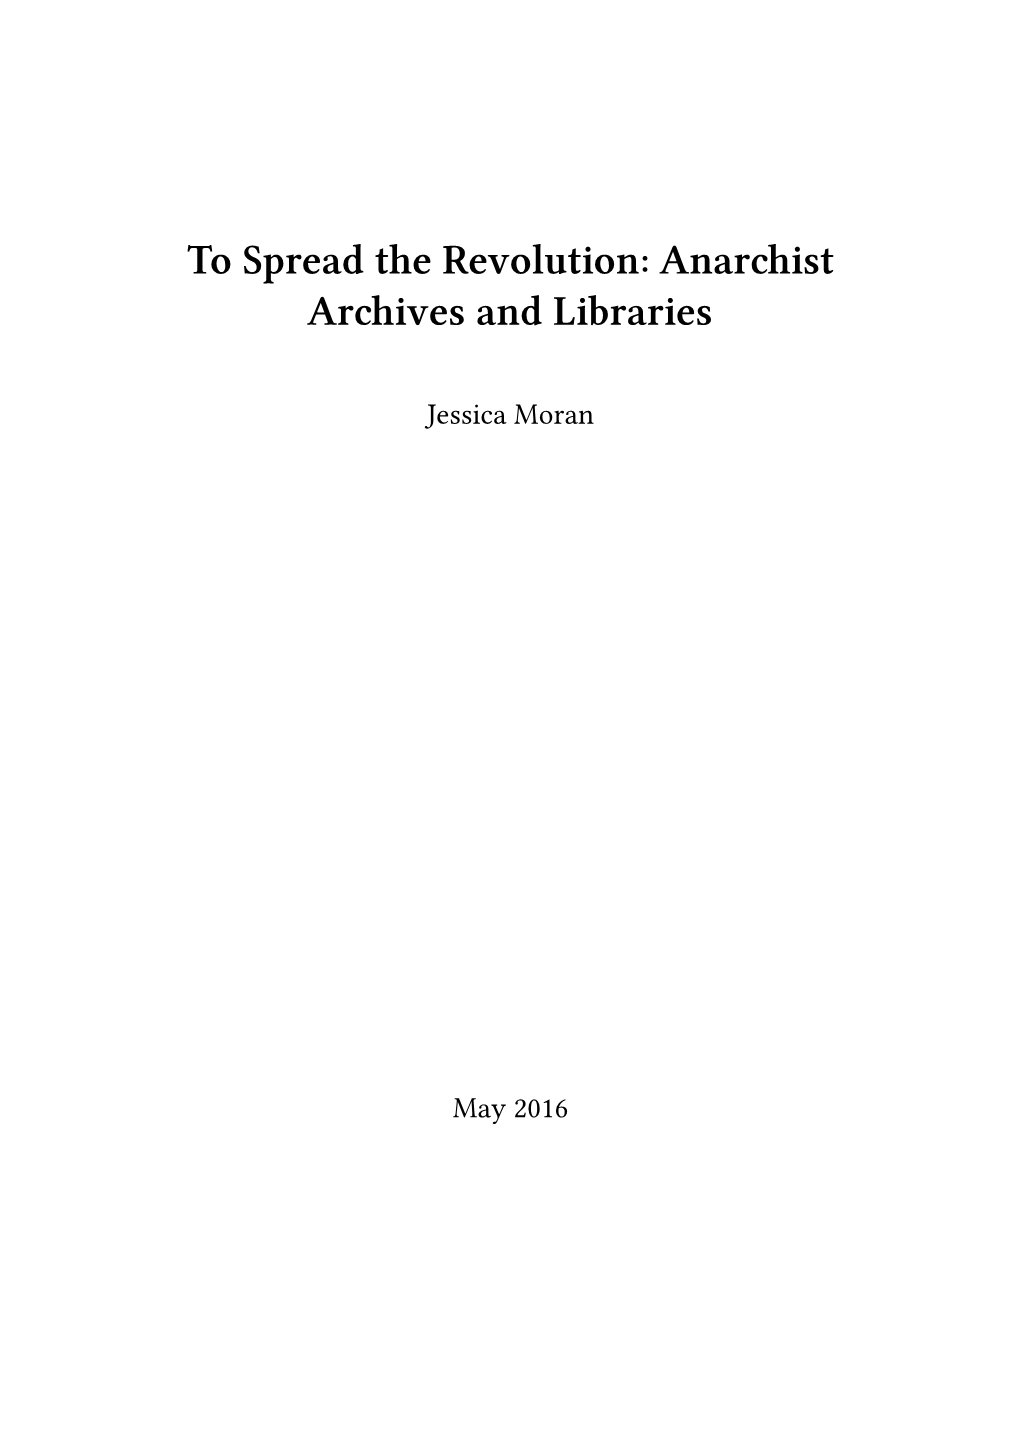 Anarchist Archives and Libraries